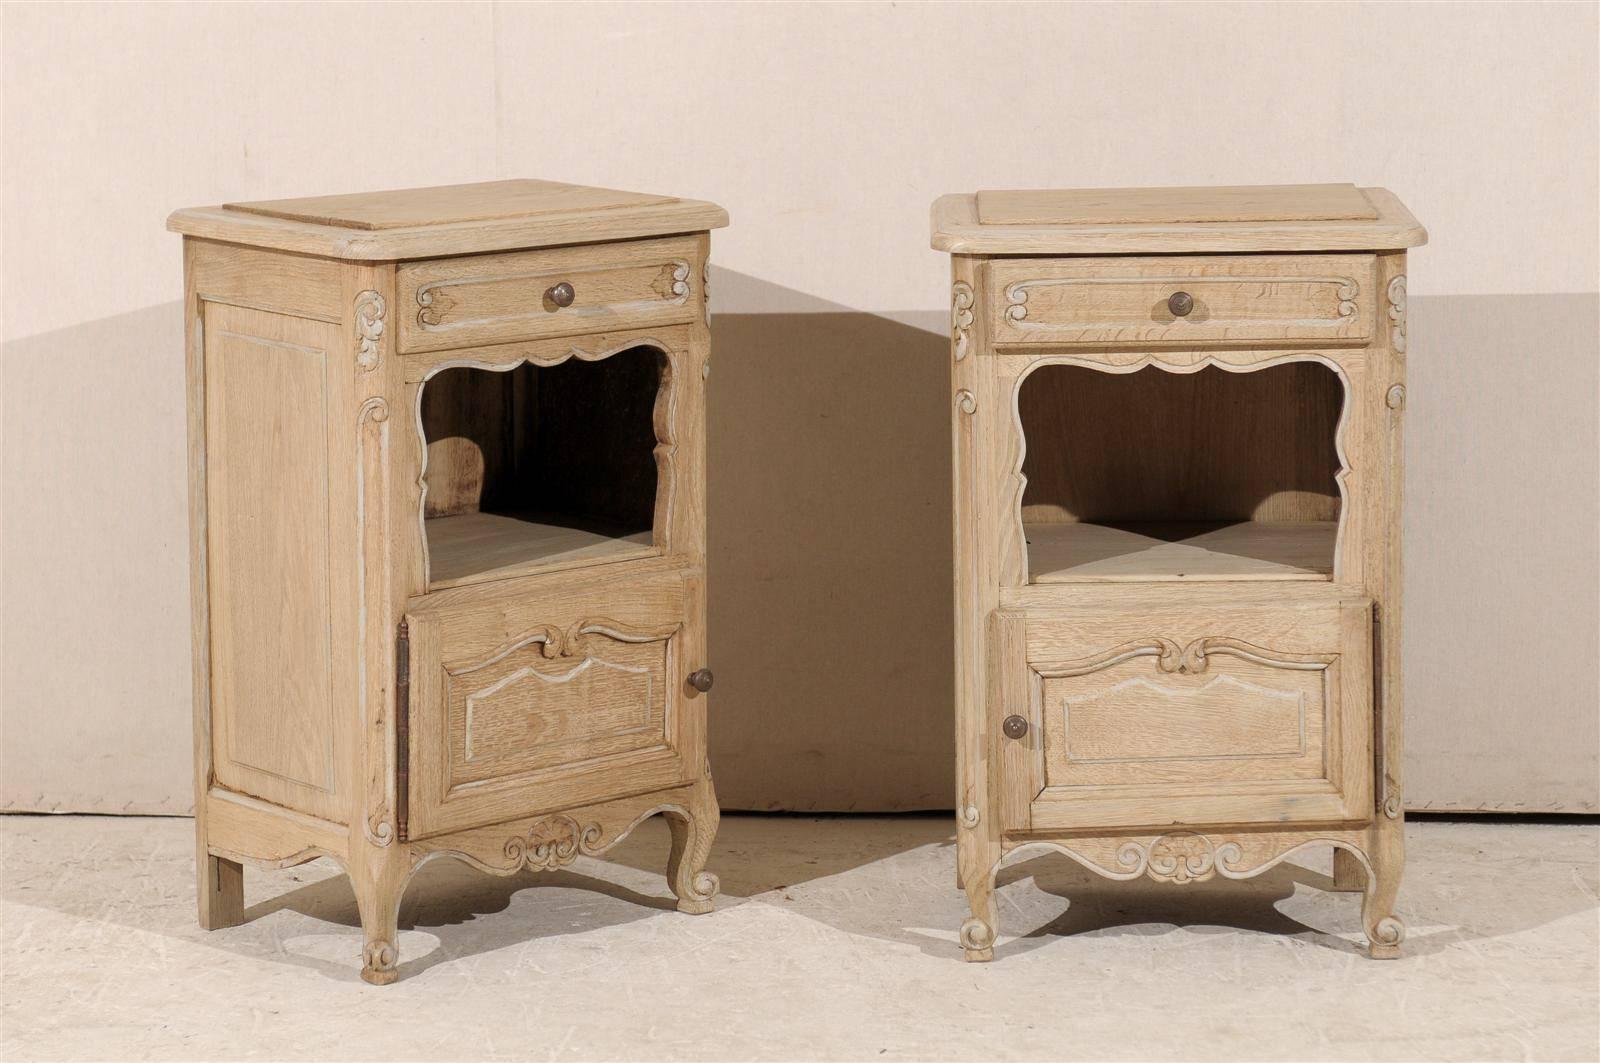 A pair of French early 20th century wooden chests with single drawer, open shelf section and single door. Unfinished, with painted accents. Lovely carved apron, raised top and scrolled feet.
 